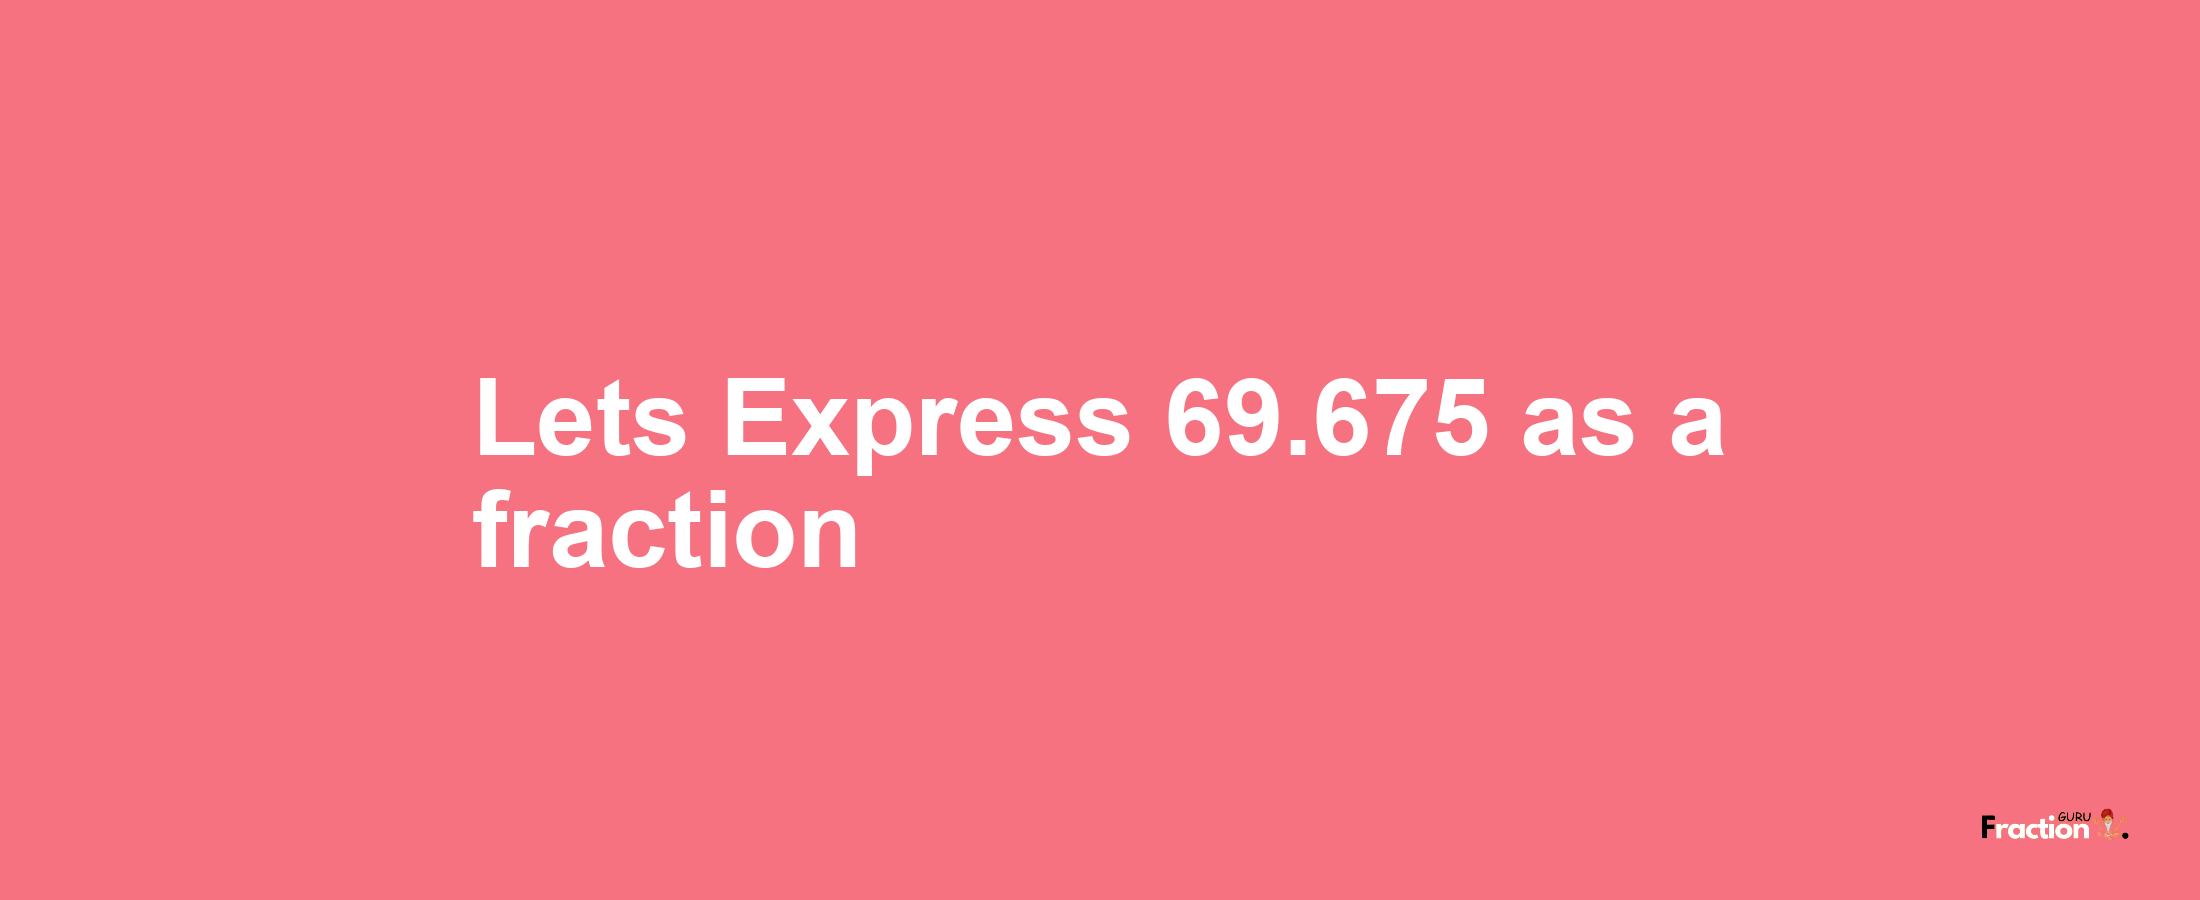 Lets Express 69.675 as afraction